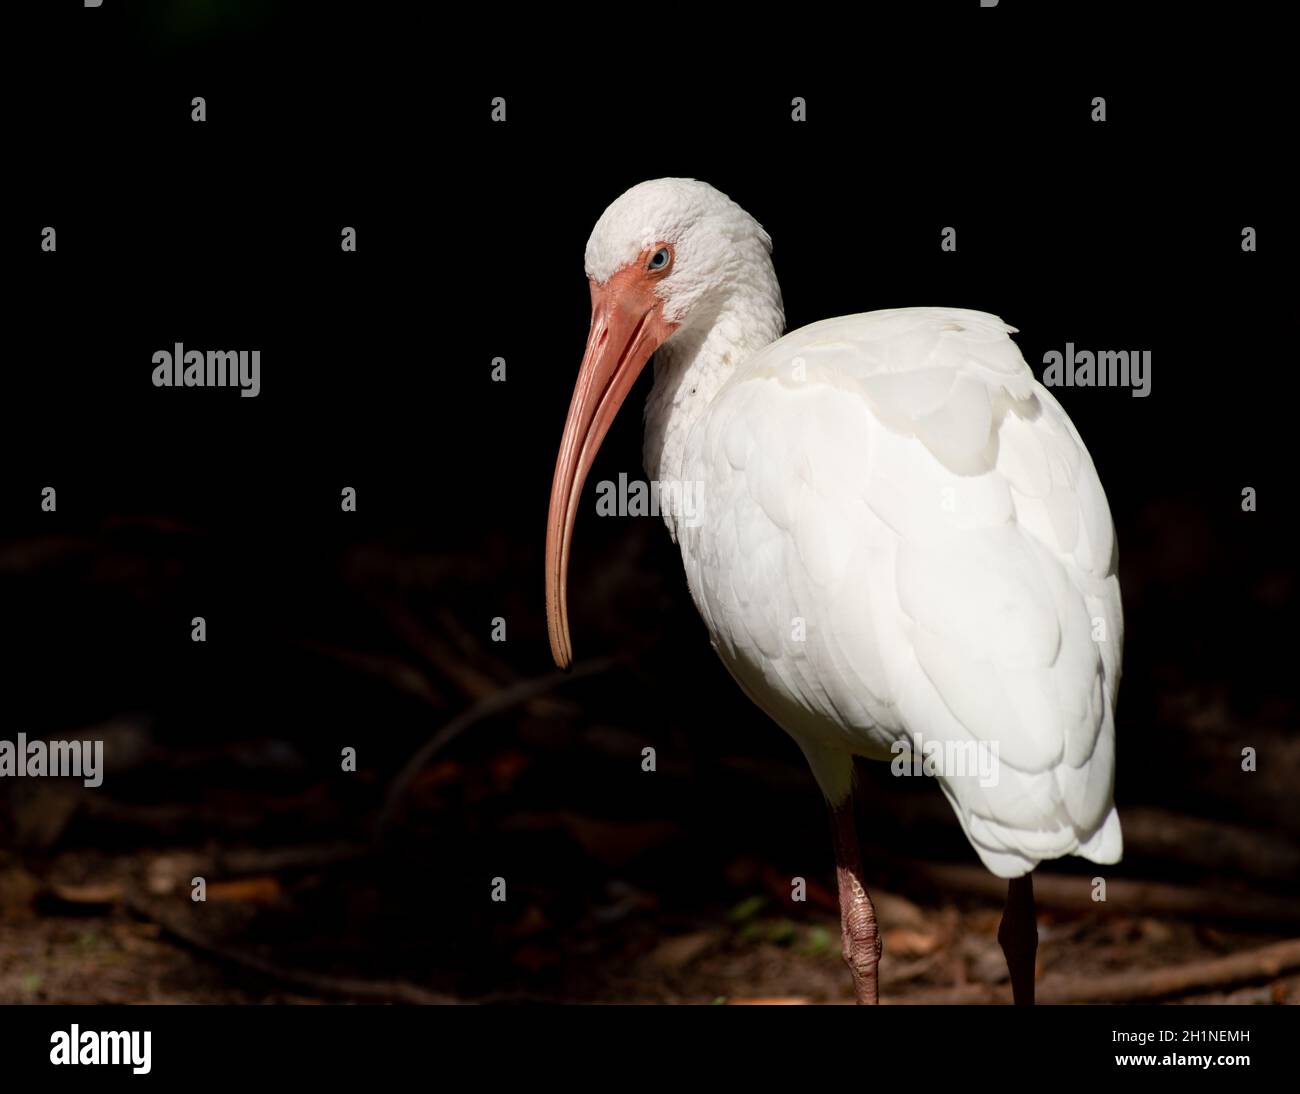 Very common in South Florida, White Ibises form large flocks often found in wetlands, saltmarshes, and local ponds throughout Southeast USA. Stock Photo